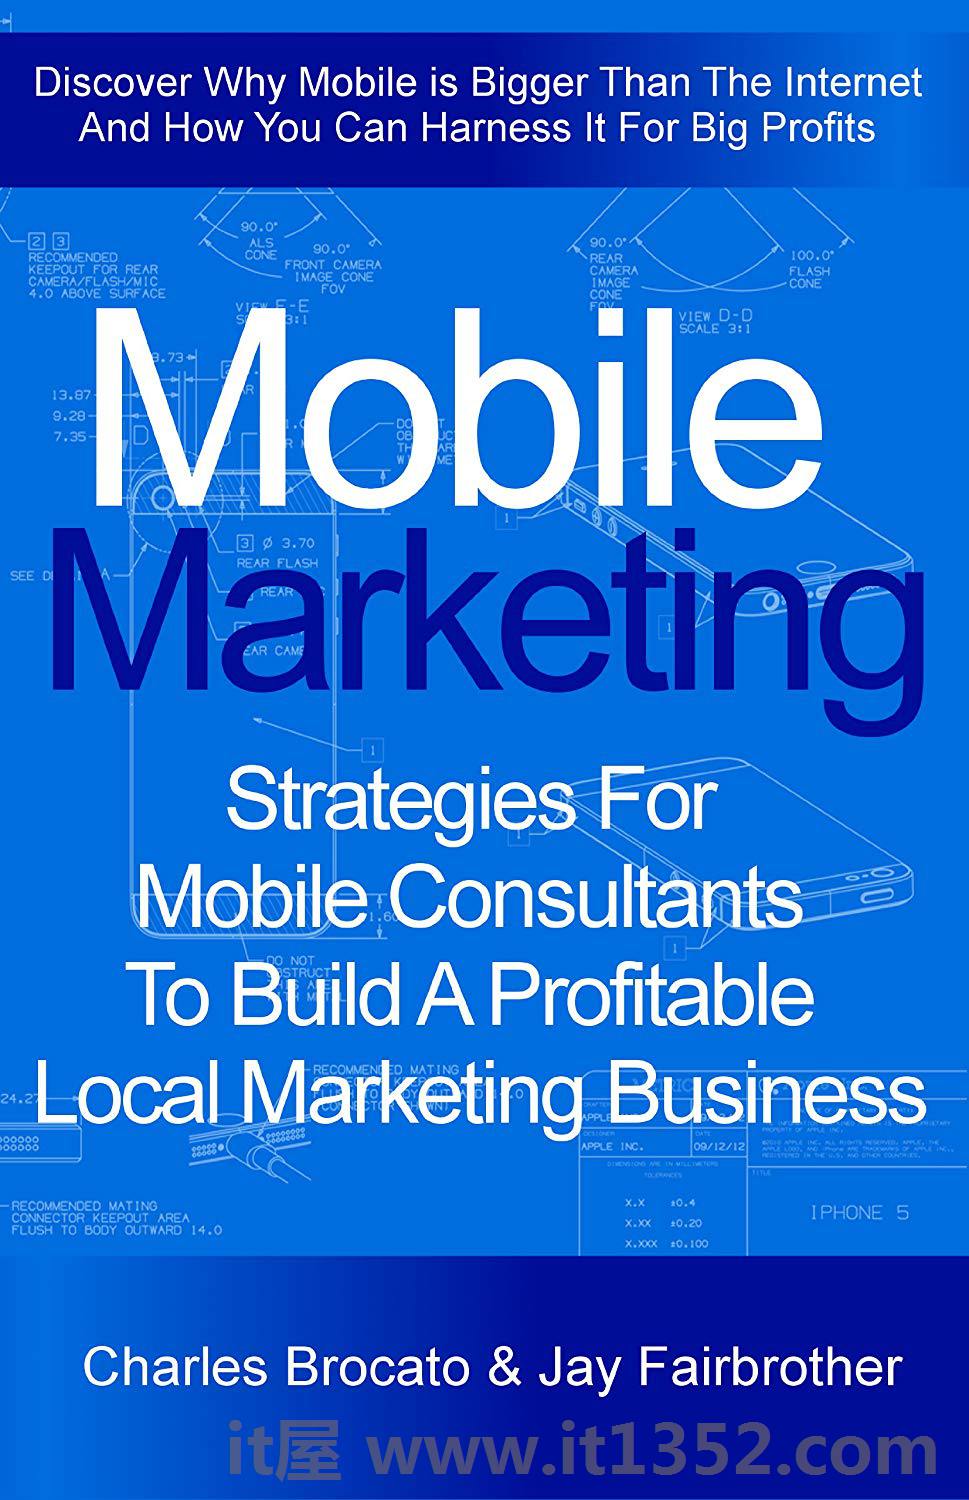 Strategies For Mobile Consultants